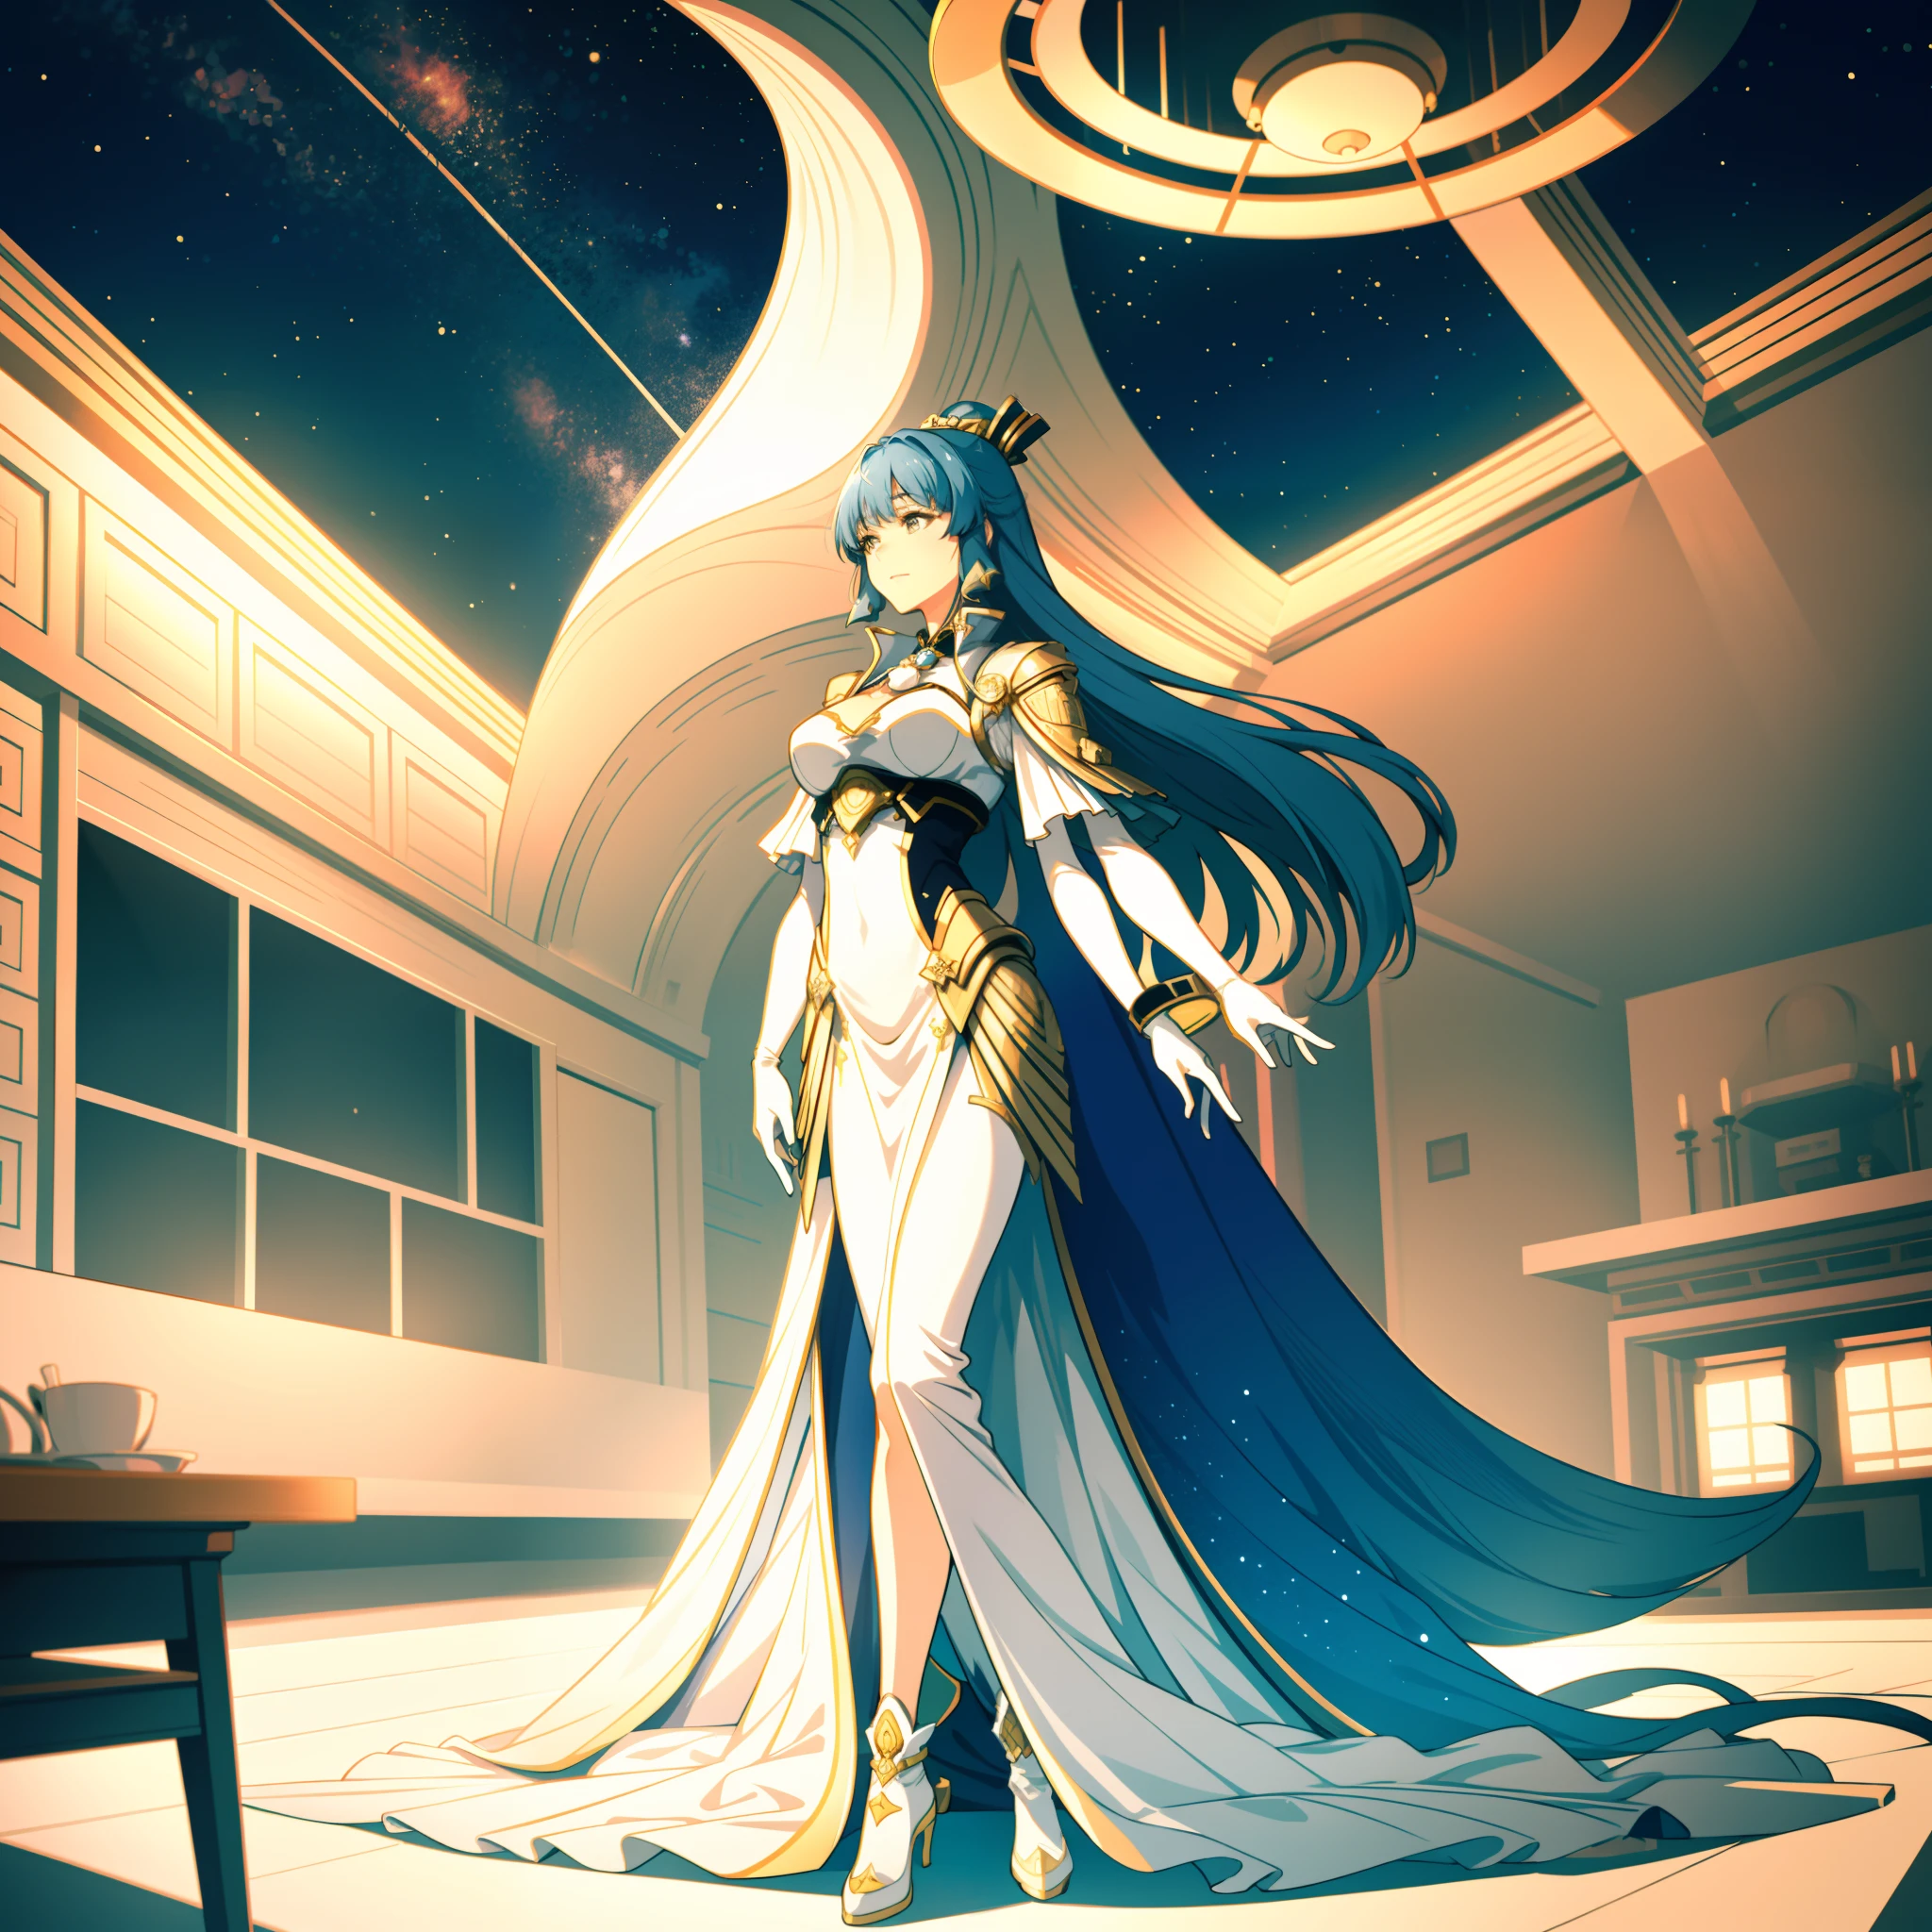 ((Ayaka)), A stunningly beautiful woman with a long one, Flowing blue hair, When she stood in front of me，radiates grace and elegance. Her delicate white dress is trimmed with beautiful gold trims，Highlights her curves (cleavage:0.3). The scene is set inside the spaceship, Filled with awesome technology and the quiet hum of deep space.